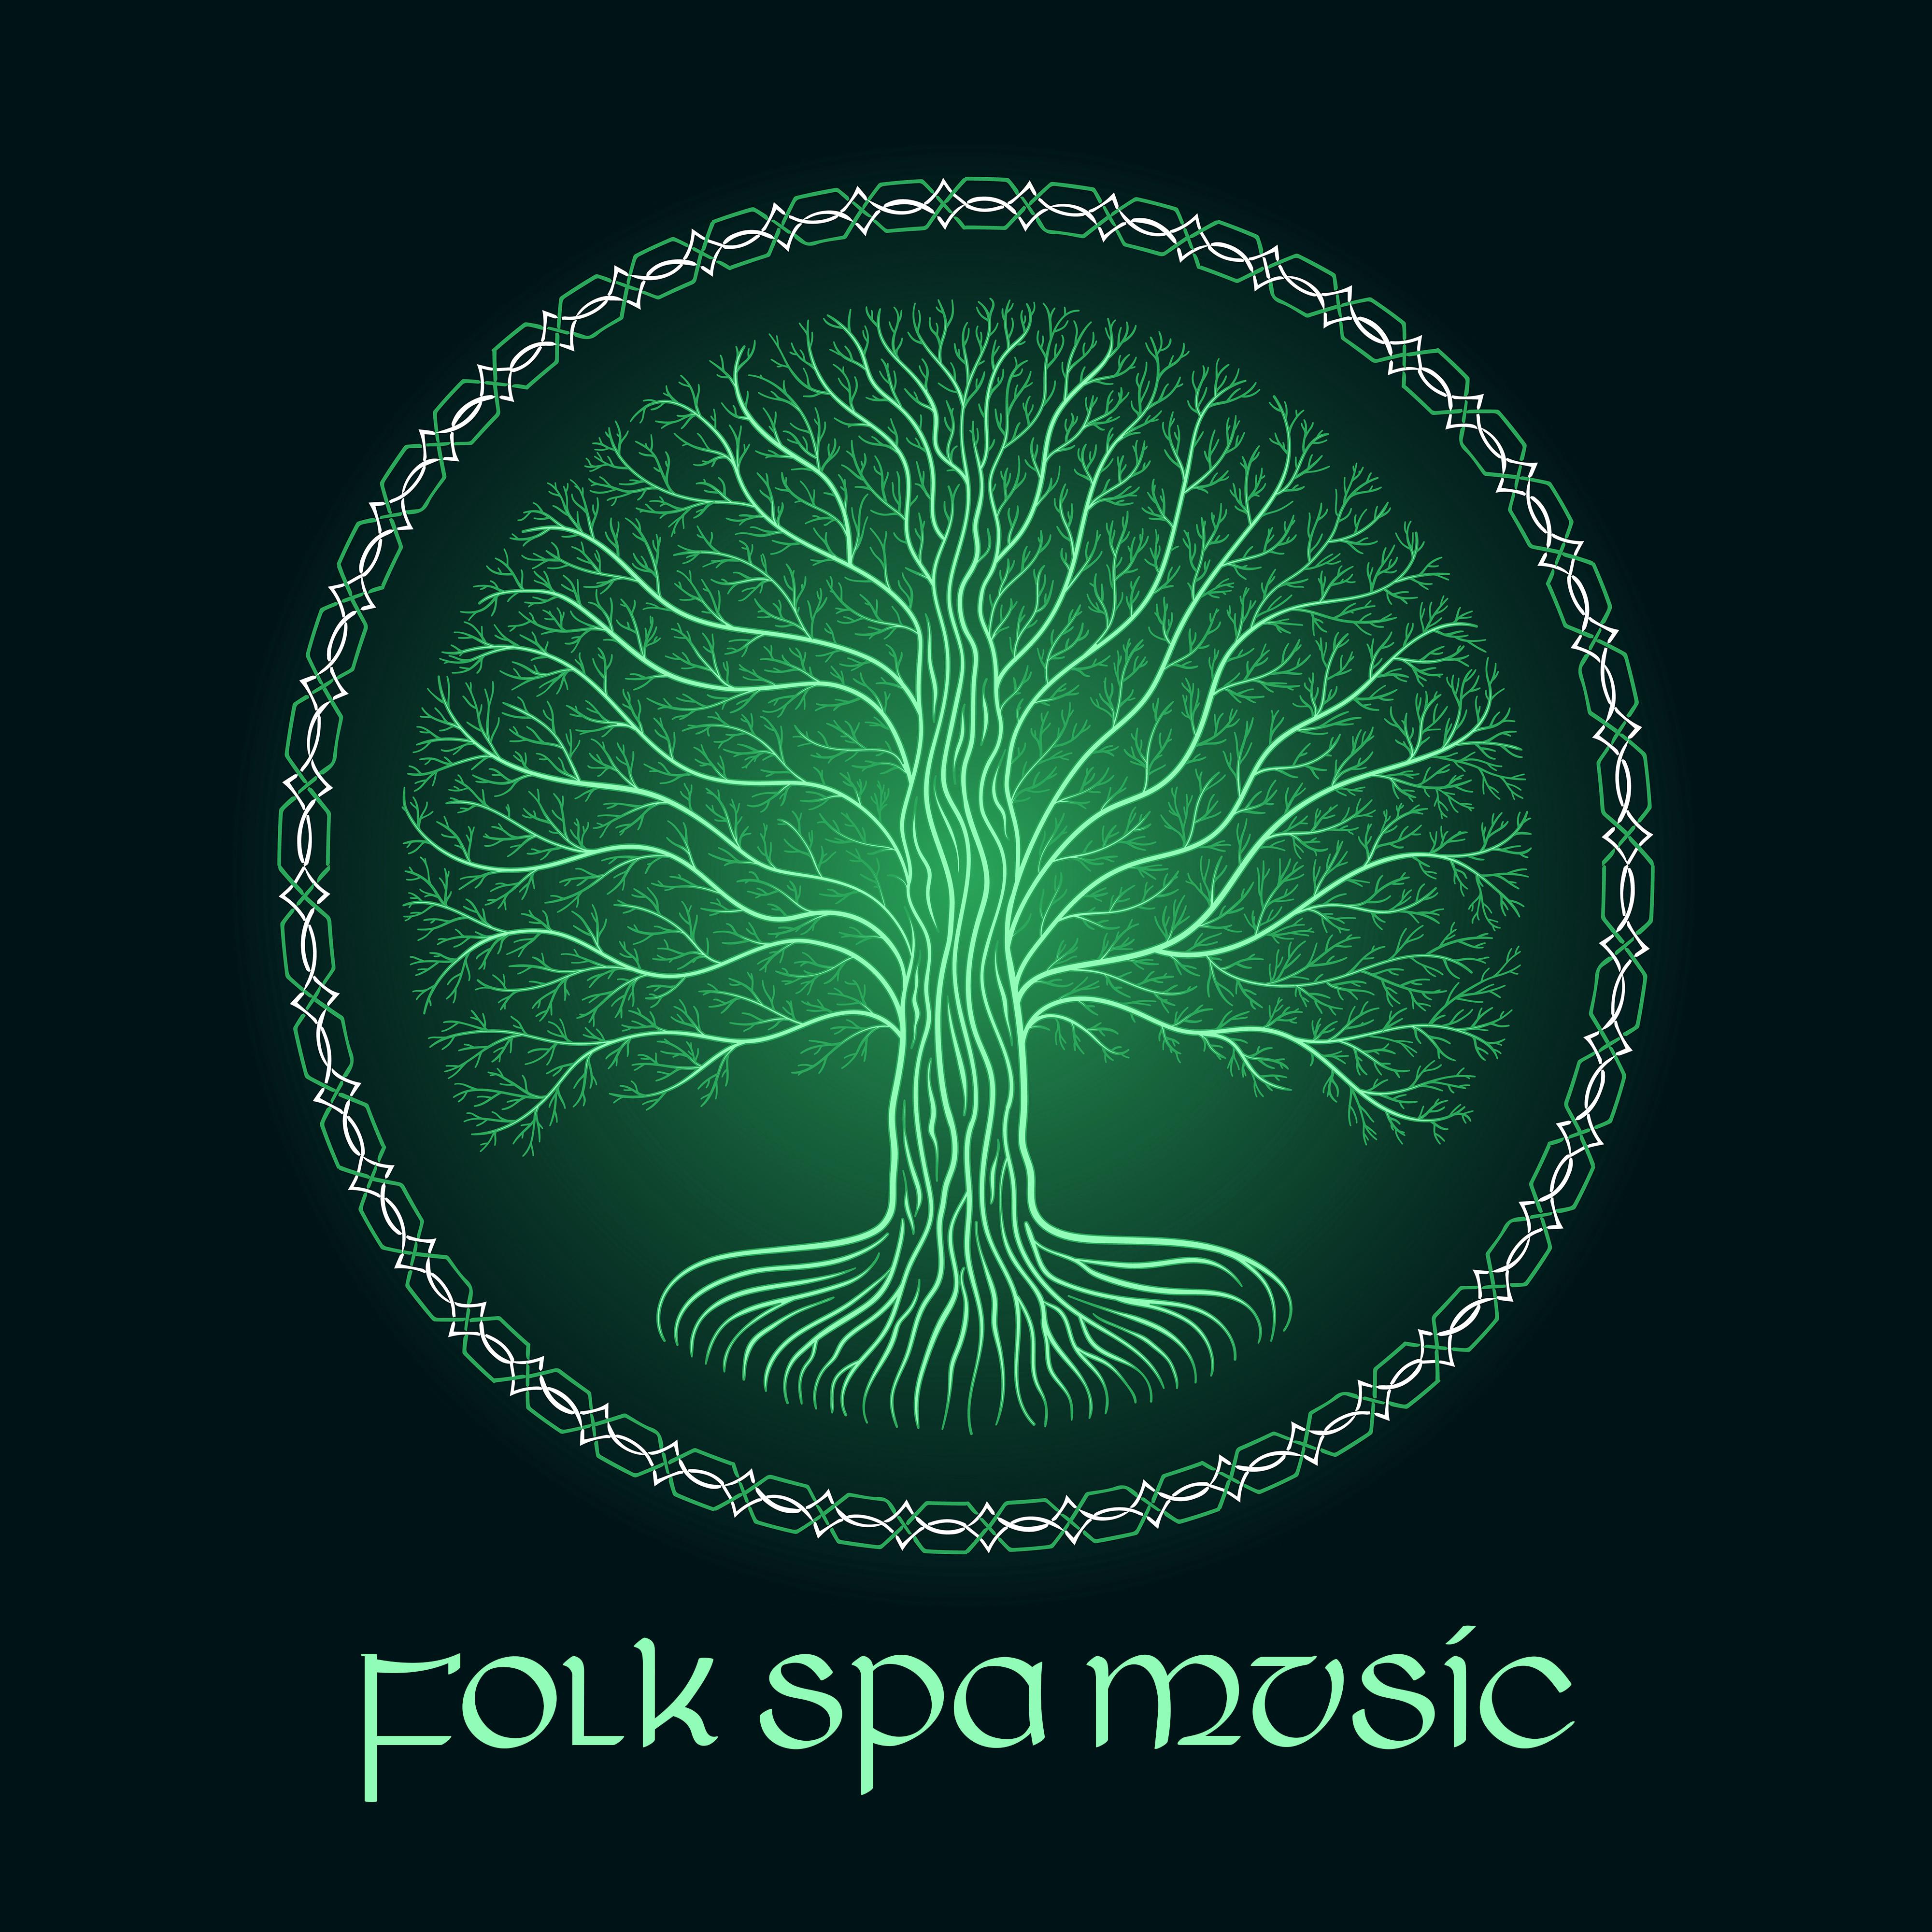 Folk Spa Music: Soothing Celtic Music for Spa, Wellness, Massage, Relaxation and Sleep